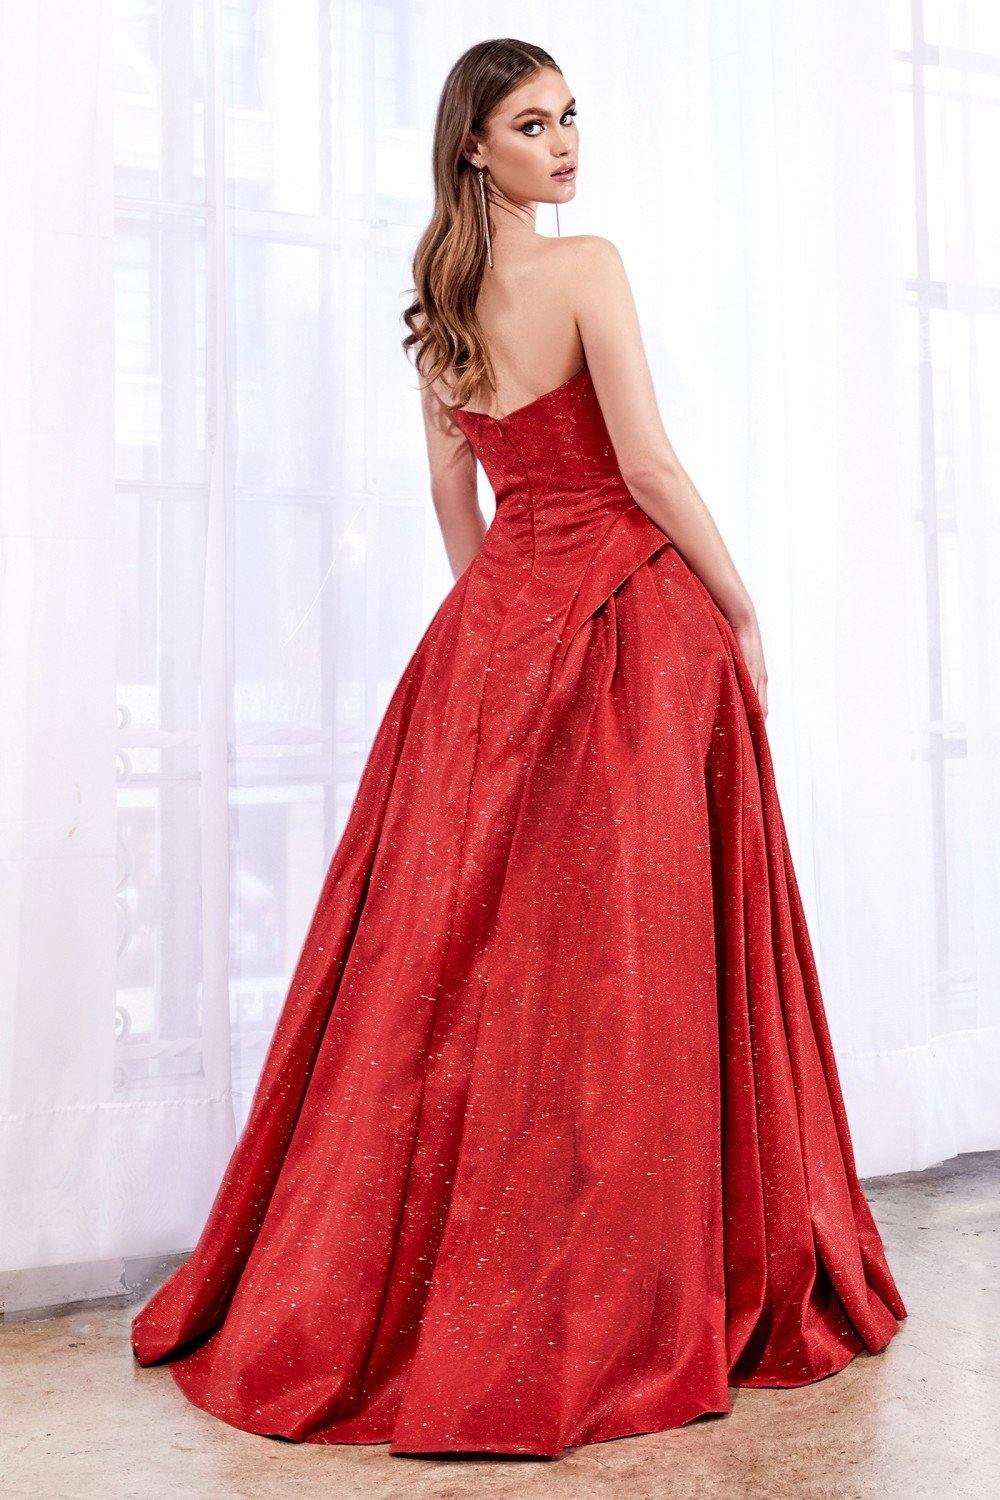 Long Strapless Red Ball Gown - The Dress Outlet